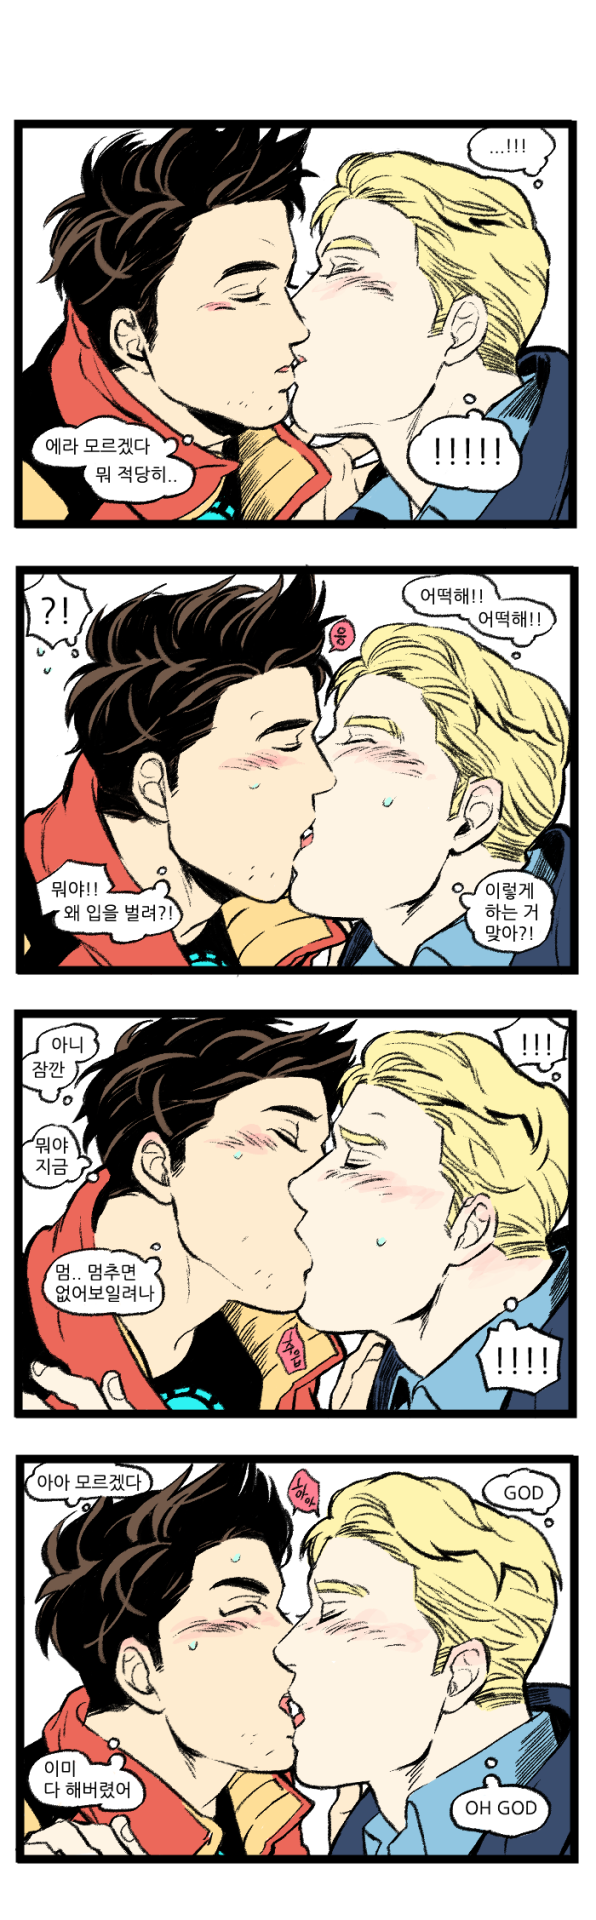 Clever Name Here — hr8: Kiss (2) Stony in Avengers Academy